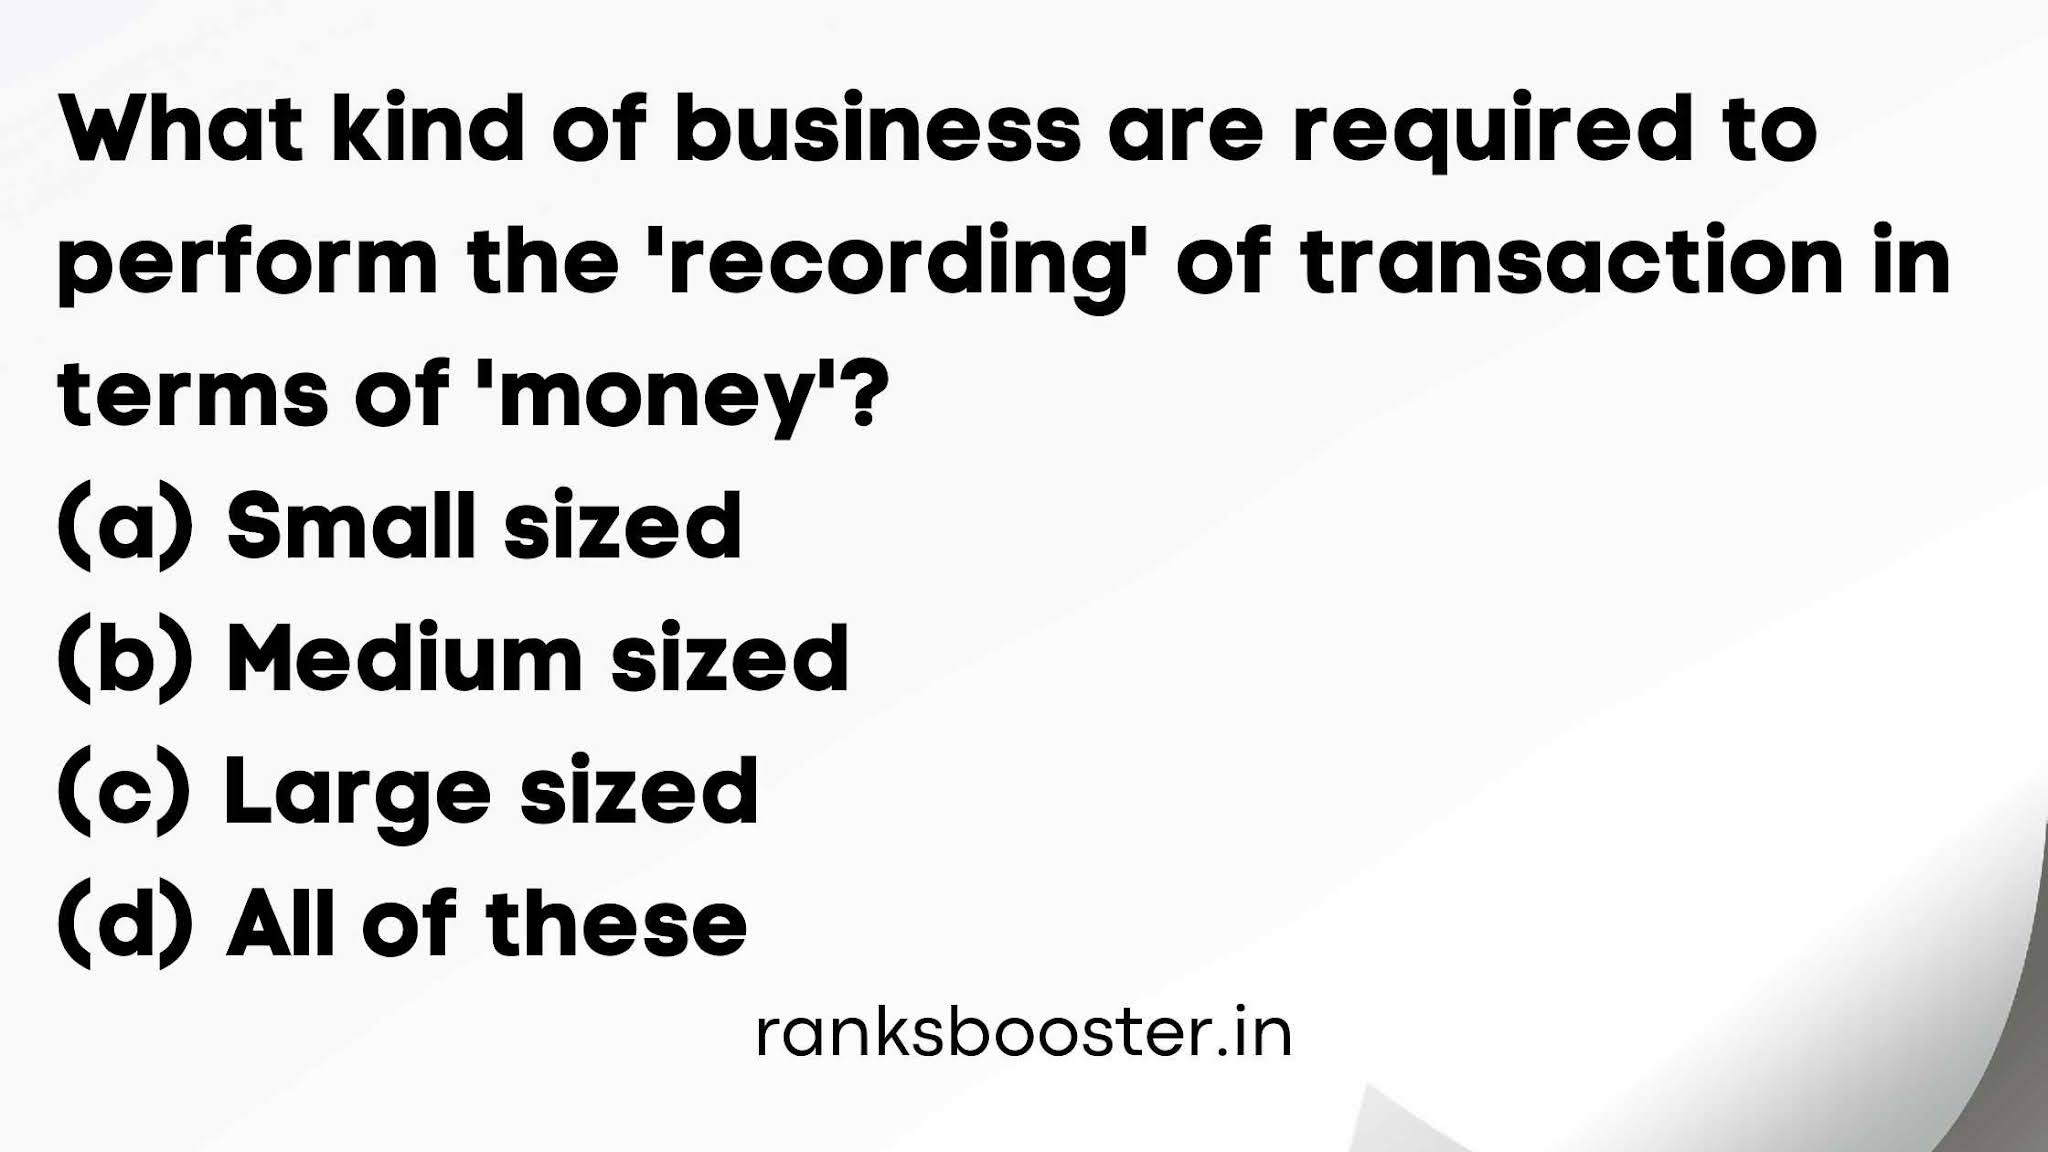 What kind of business are required to perform the 'recording' of transaction in terms of 'money'? (a) Small sized (b) Medium sized (c) Large sized (d) All of these